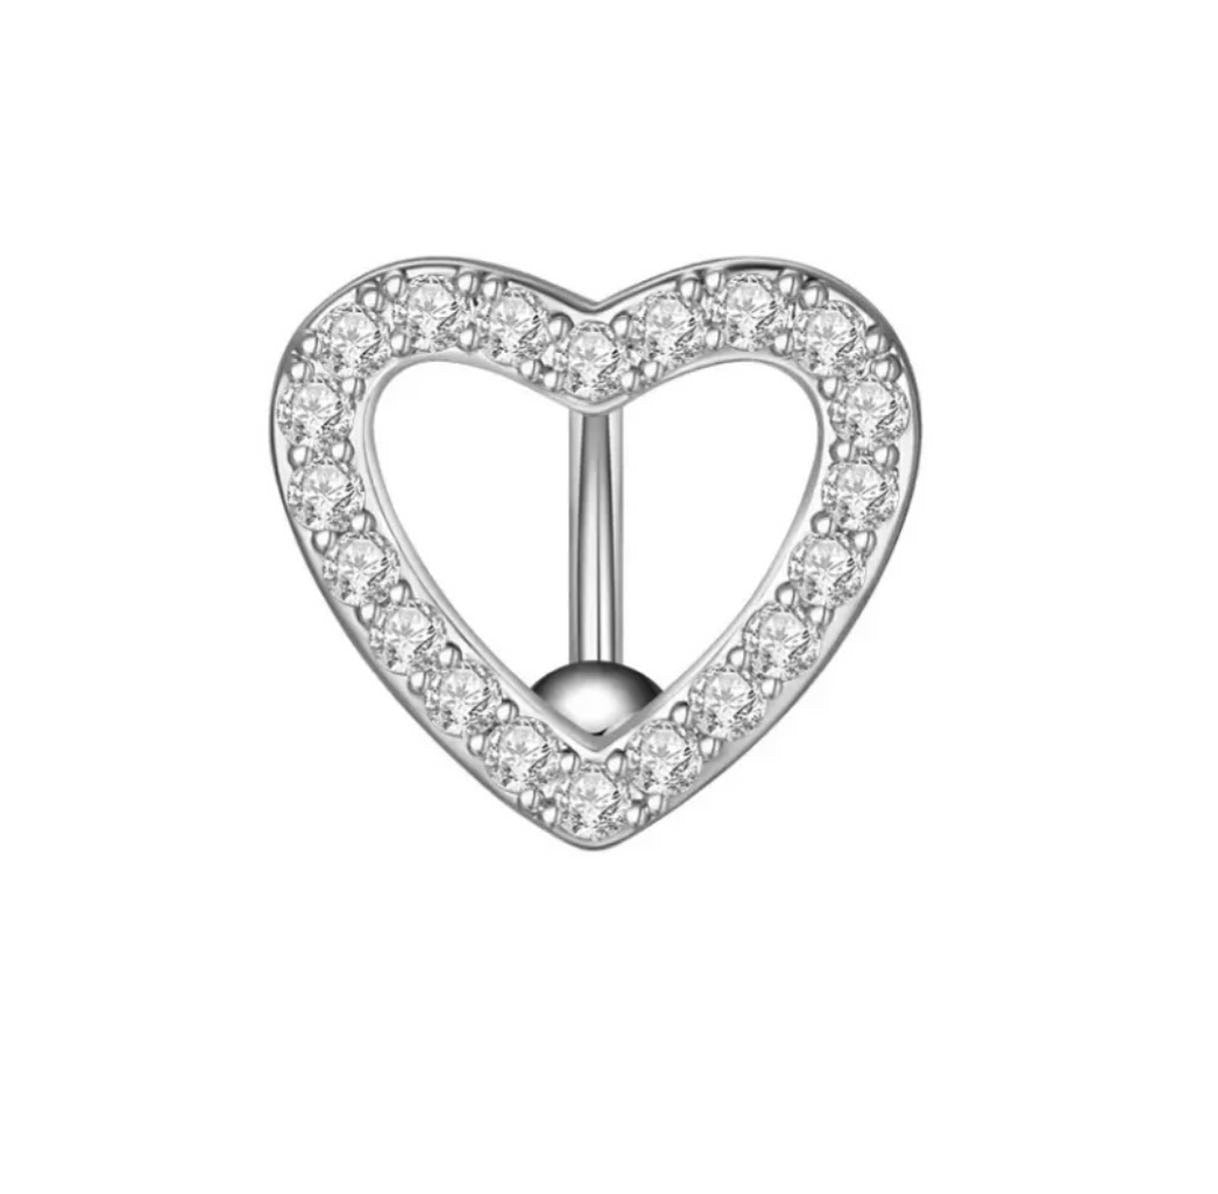 Silver Heart Belly Button Navel Ring Piercing Jewelry 14G with Rhinestone Top Mount Non-Dangle White Background Image